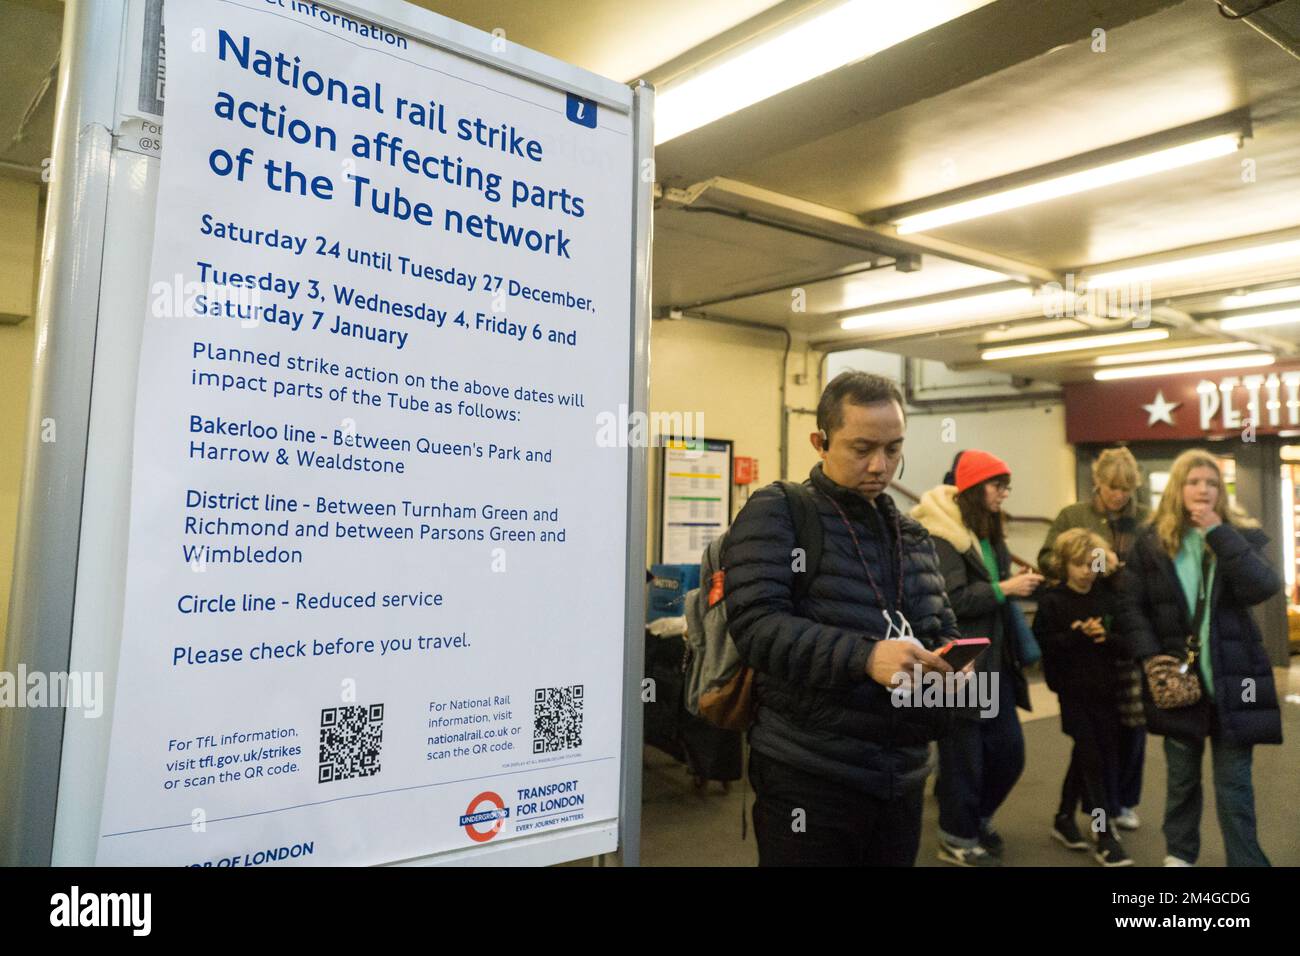 London, UK, 20 December 2022: A poster in South Kensignton tube station warns passengers of upcoming travel disruption due to a national rail strike over the Christmas period. The unions are in dispute with rail companies over pay and working conditions. Anna Watson/Alamy Live News Stock Photo